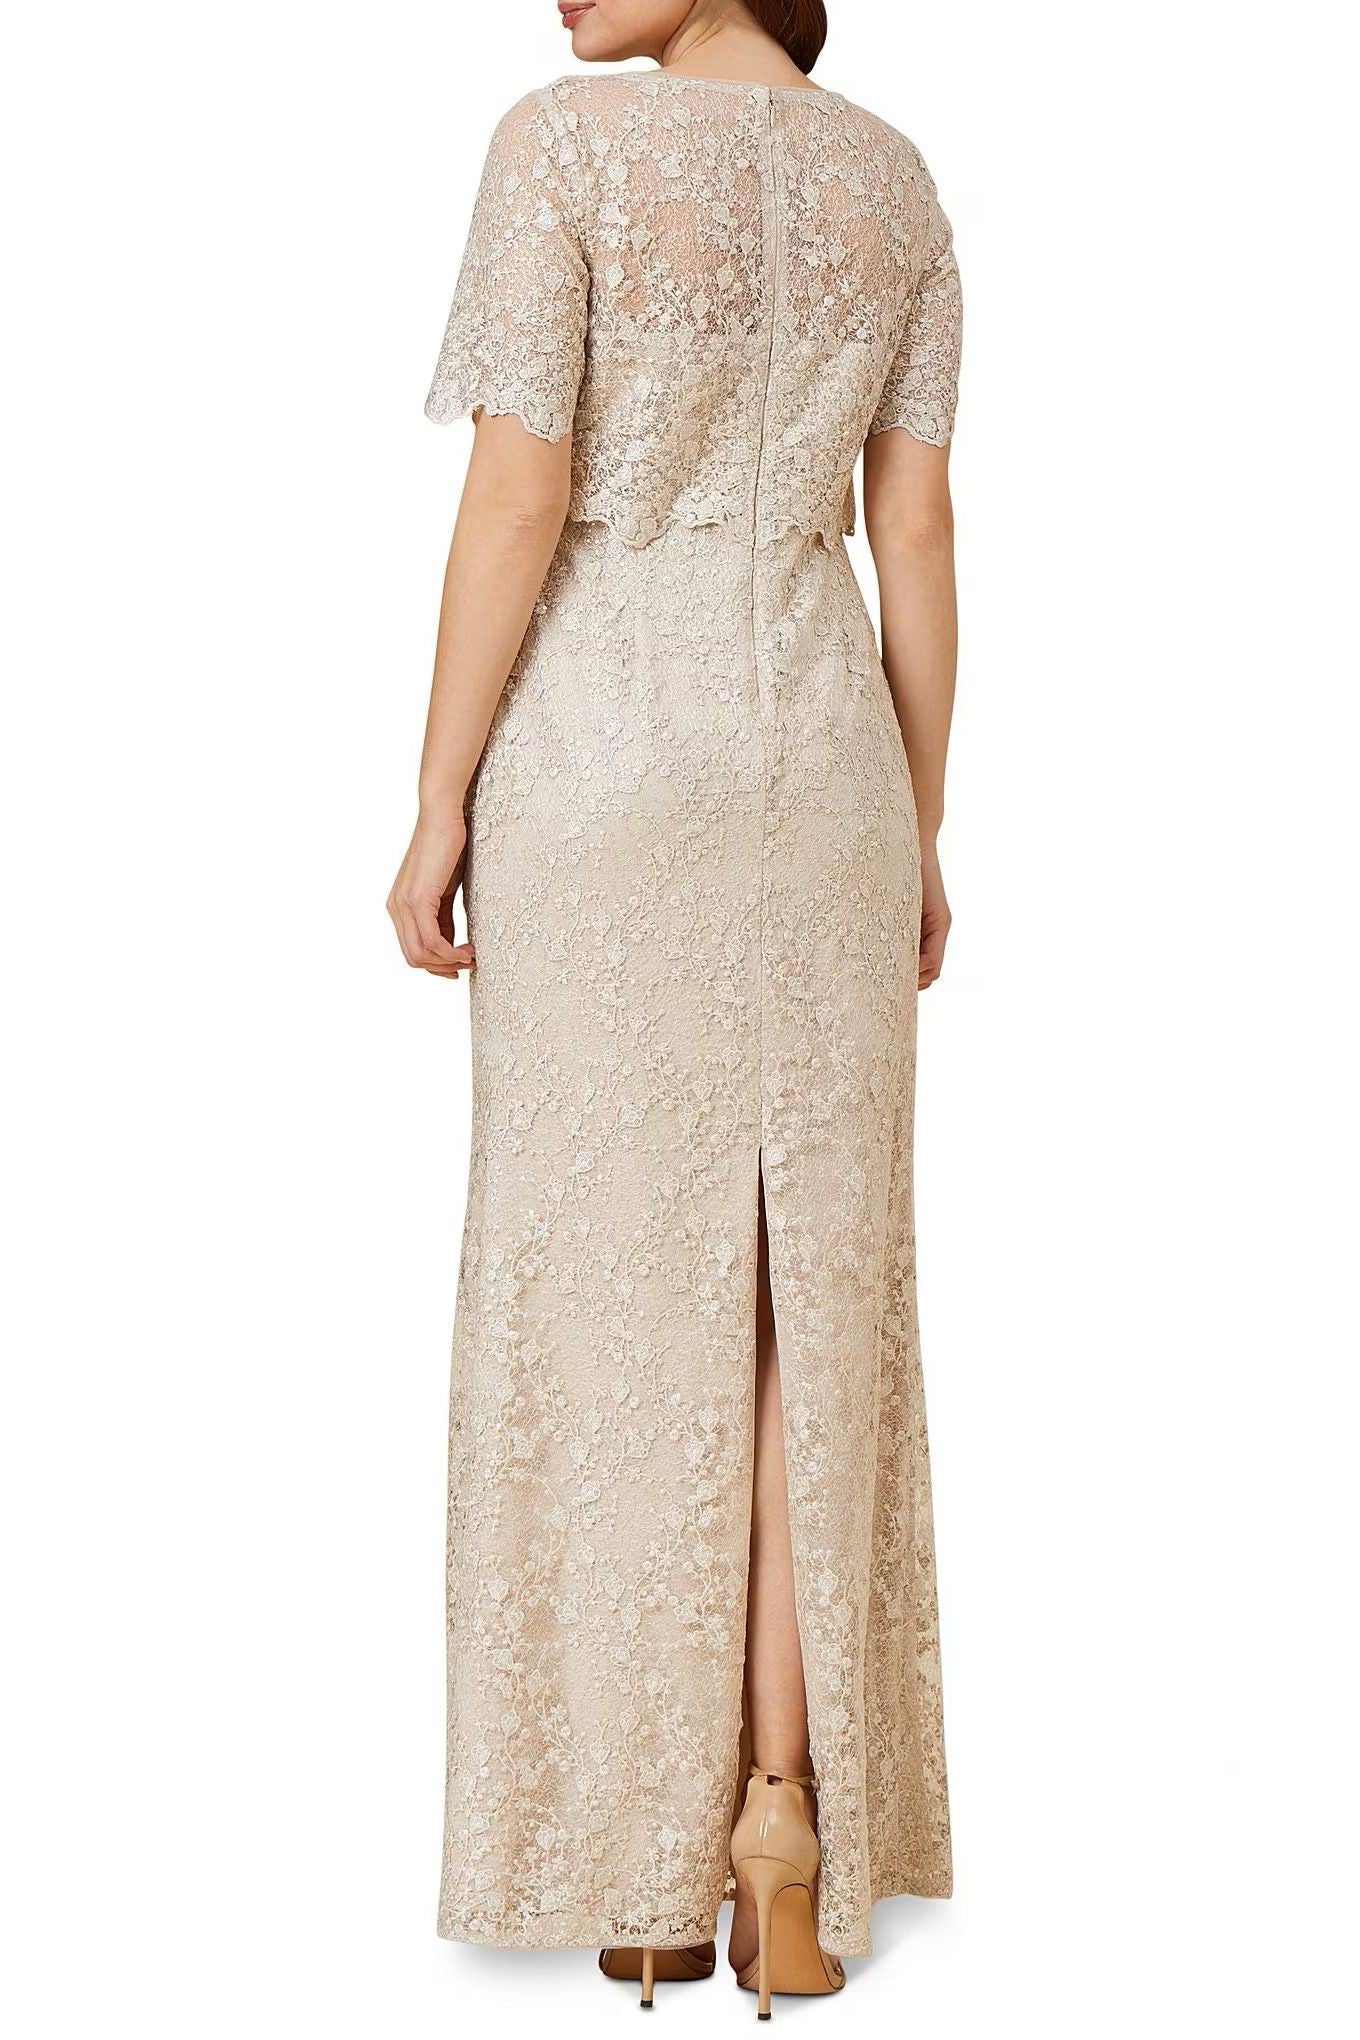 Adrianna Papell A-Line Short Sleeve Sequin Gown